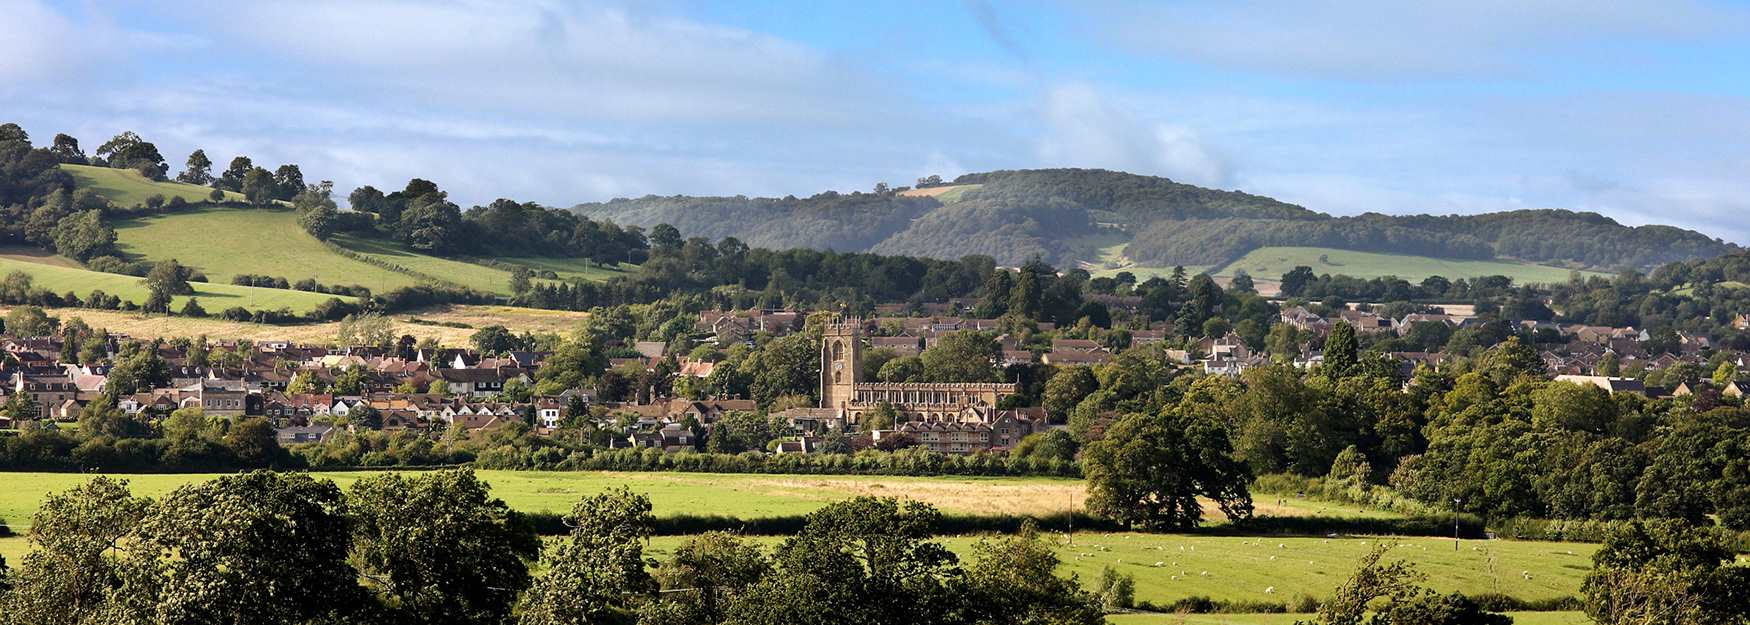 Winchcombe - 'Walking Capital of the Cotswolds'